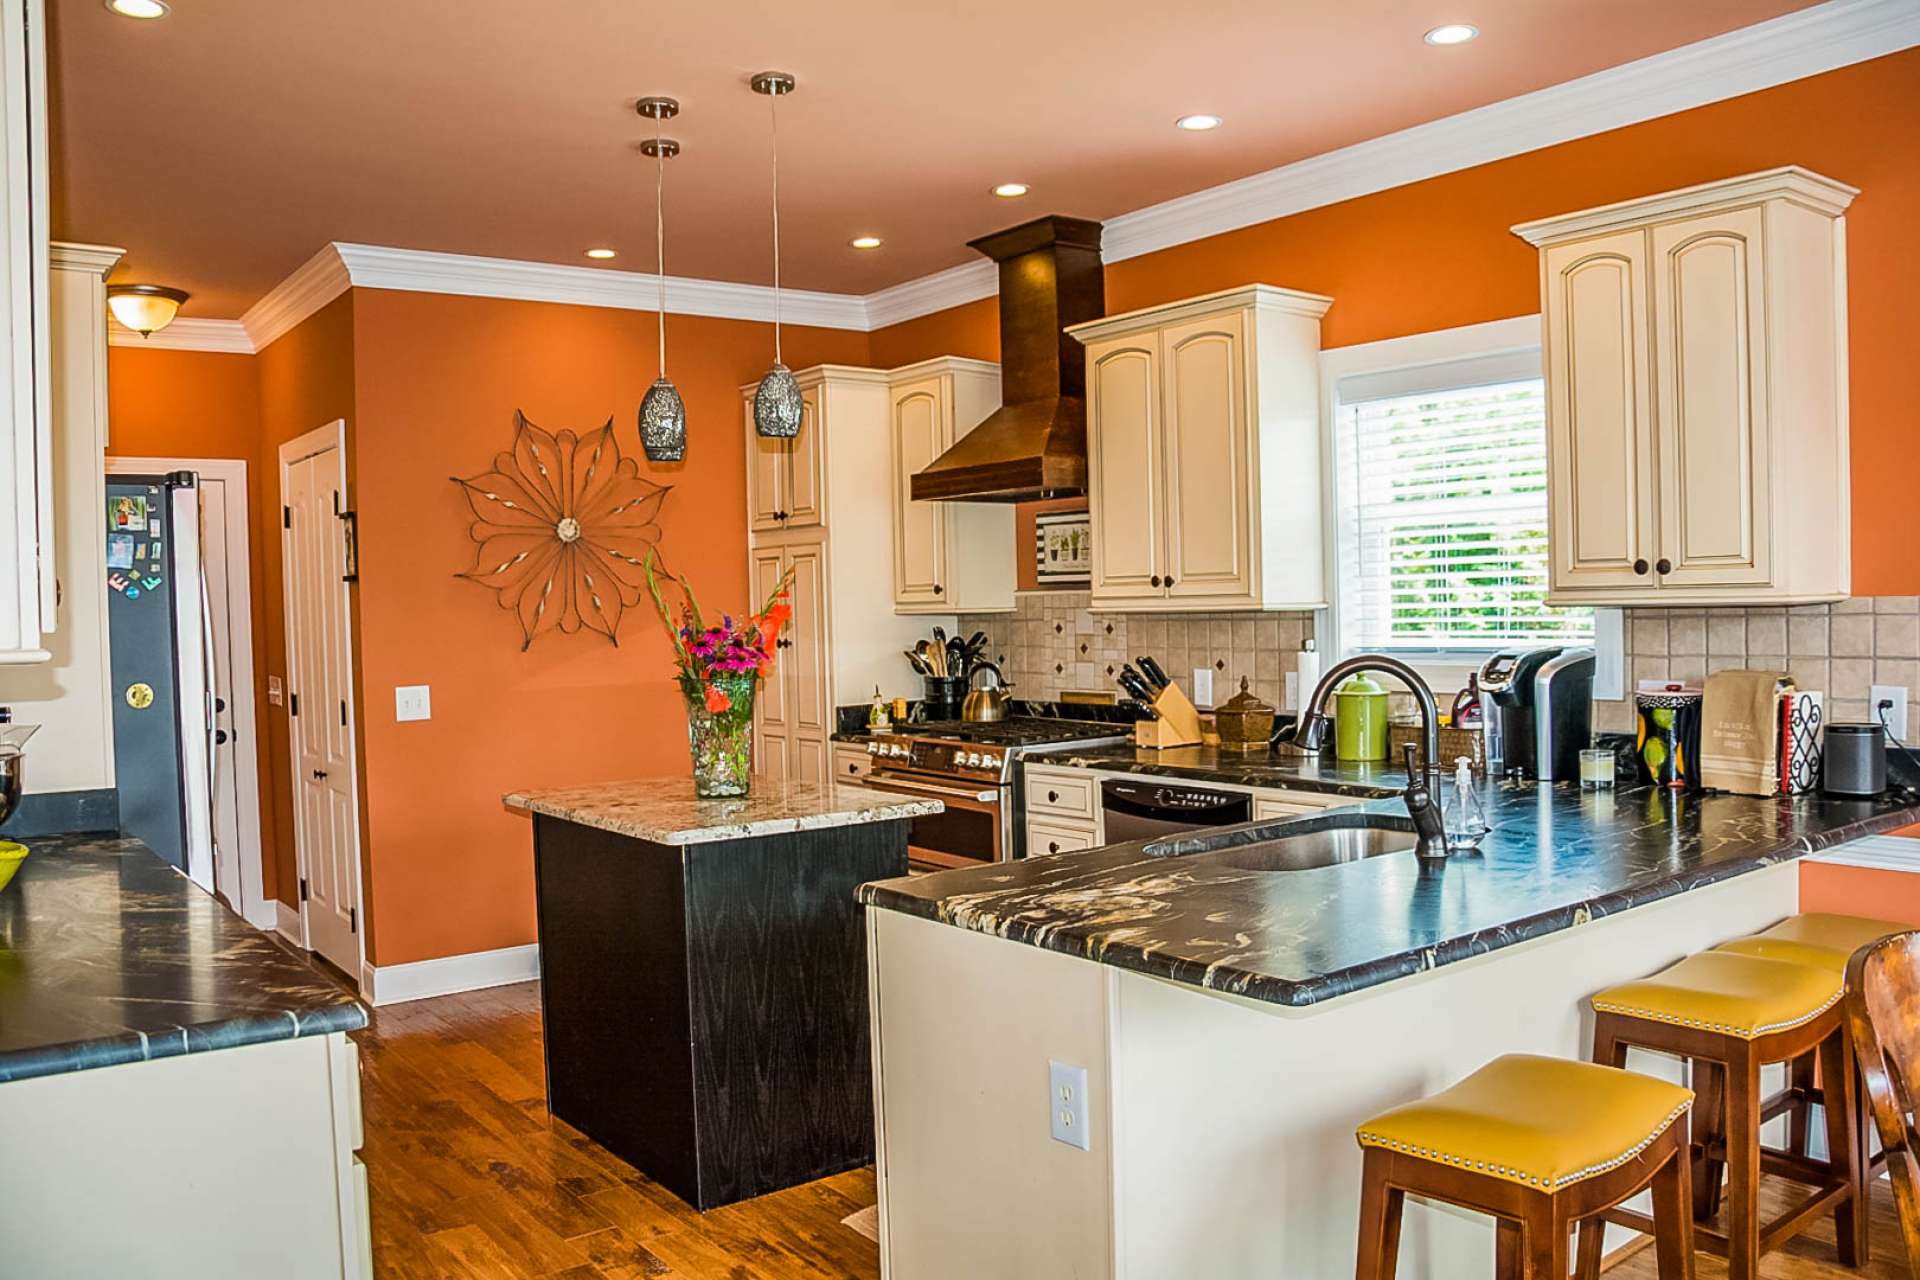 This beautifully renovated kitchen offers abundant cabinetry, unique granite, stainless appliances, walk-in pantry, and plenty of work and storage space that includes a bar with seating.